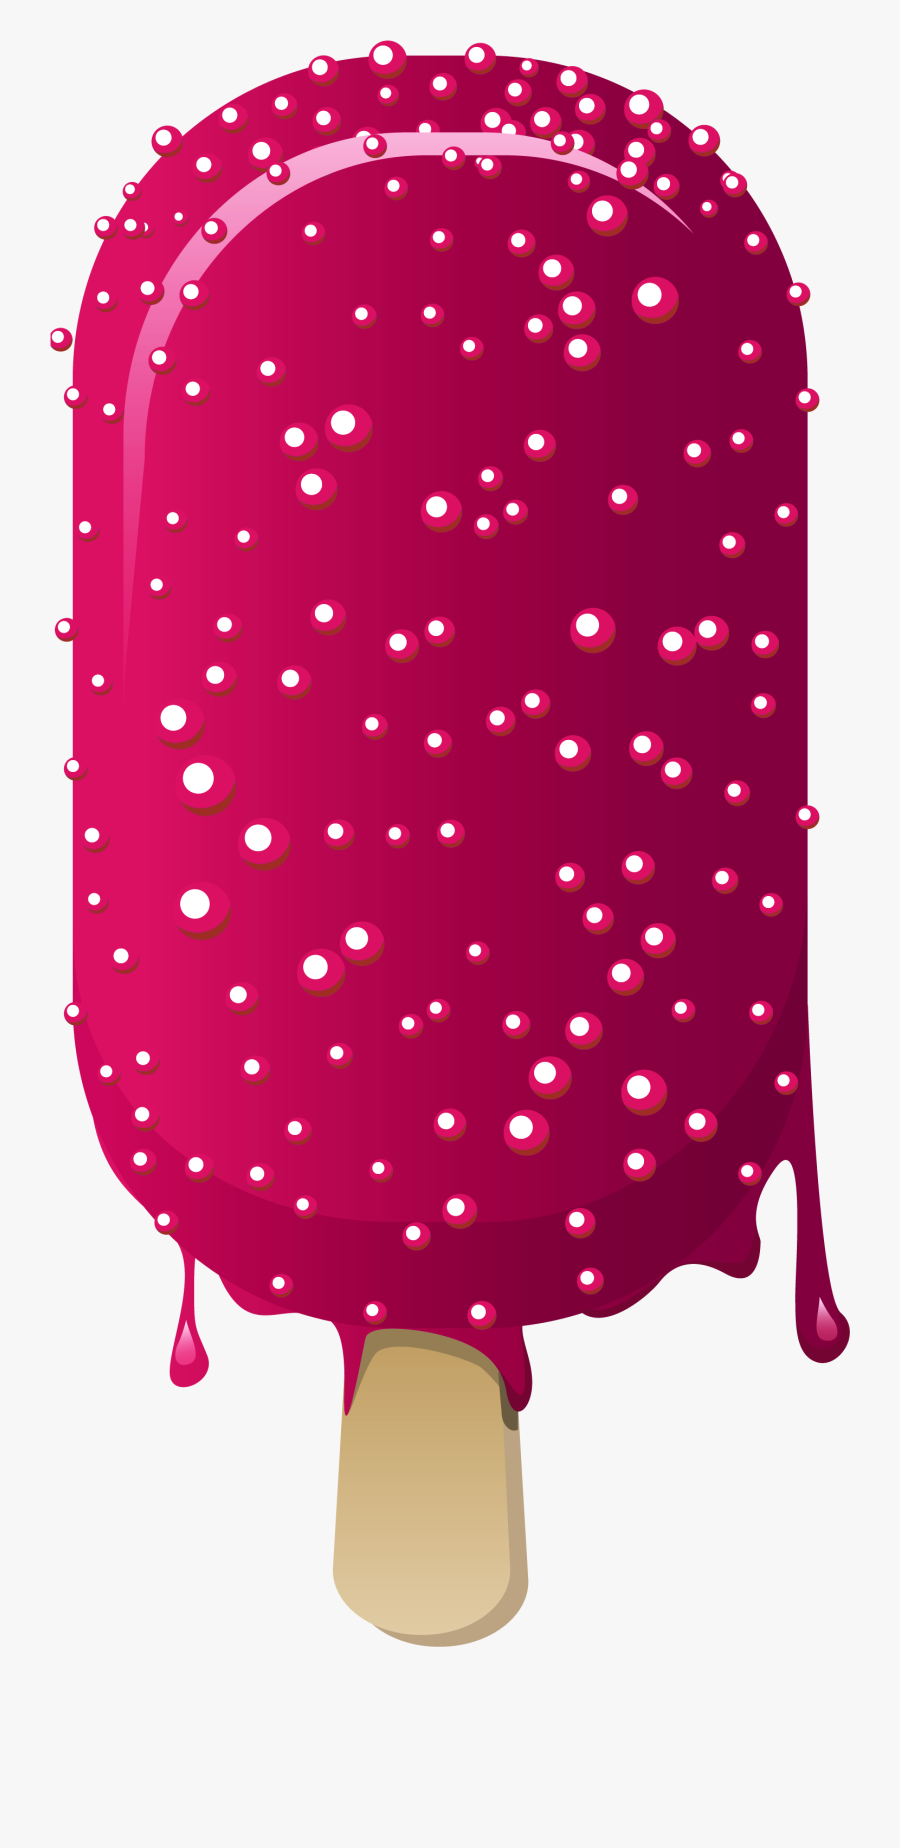 Ice Cream Stick Png Picture - Ice Cream Stick Clipart Png, Transparent Clipart